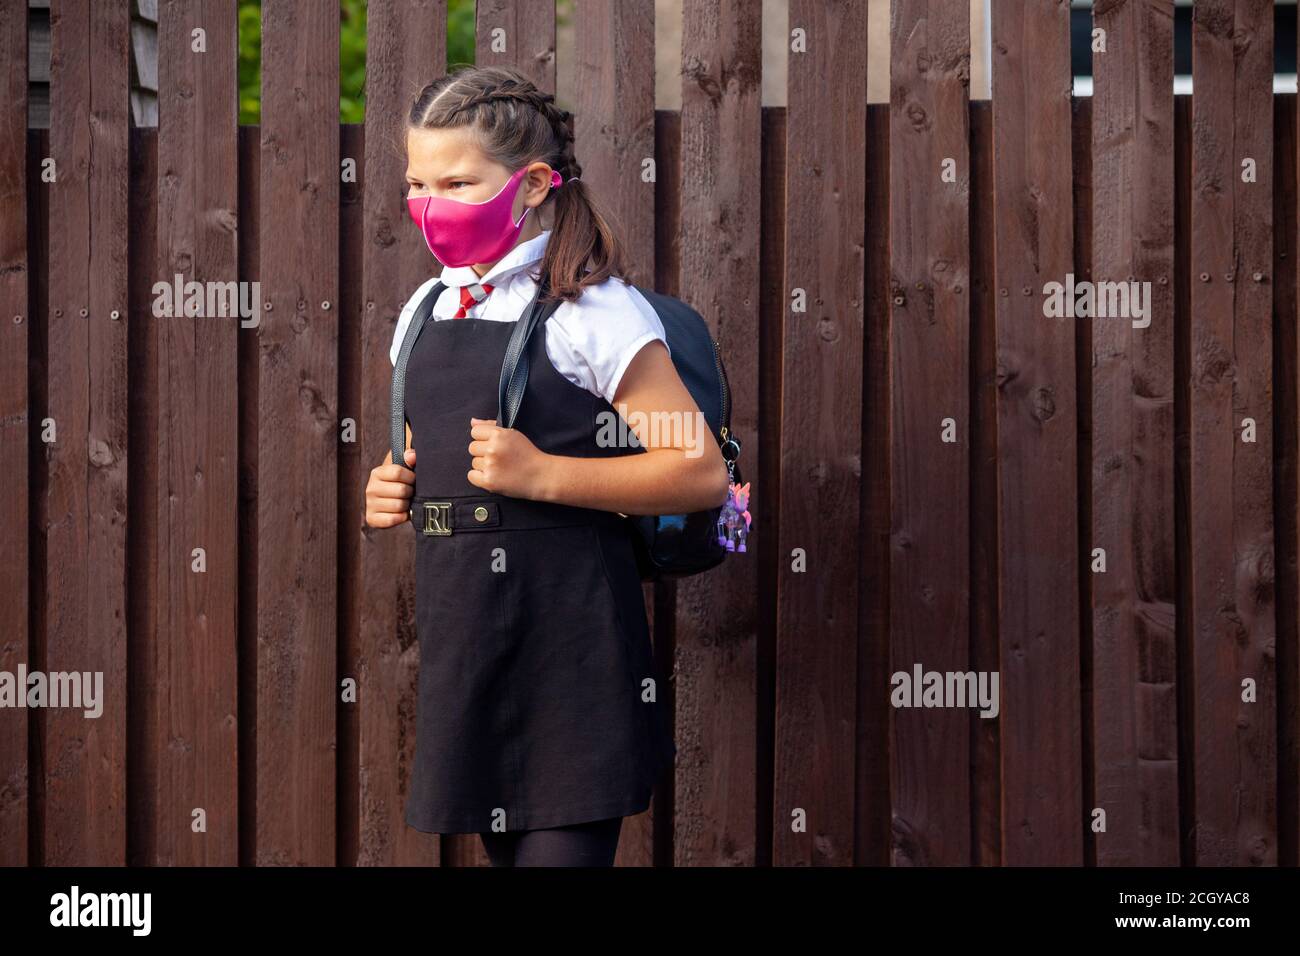 A 10 year old schoolgirl wearing a school uniform and pink face mask and looking away. Stock Photo